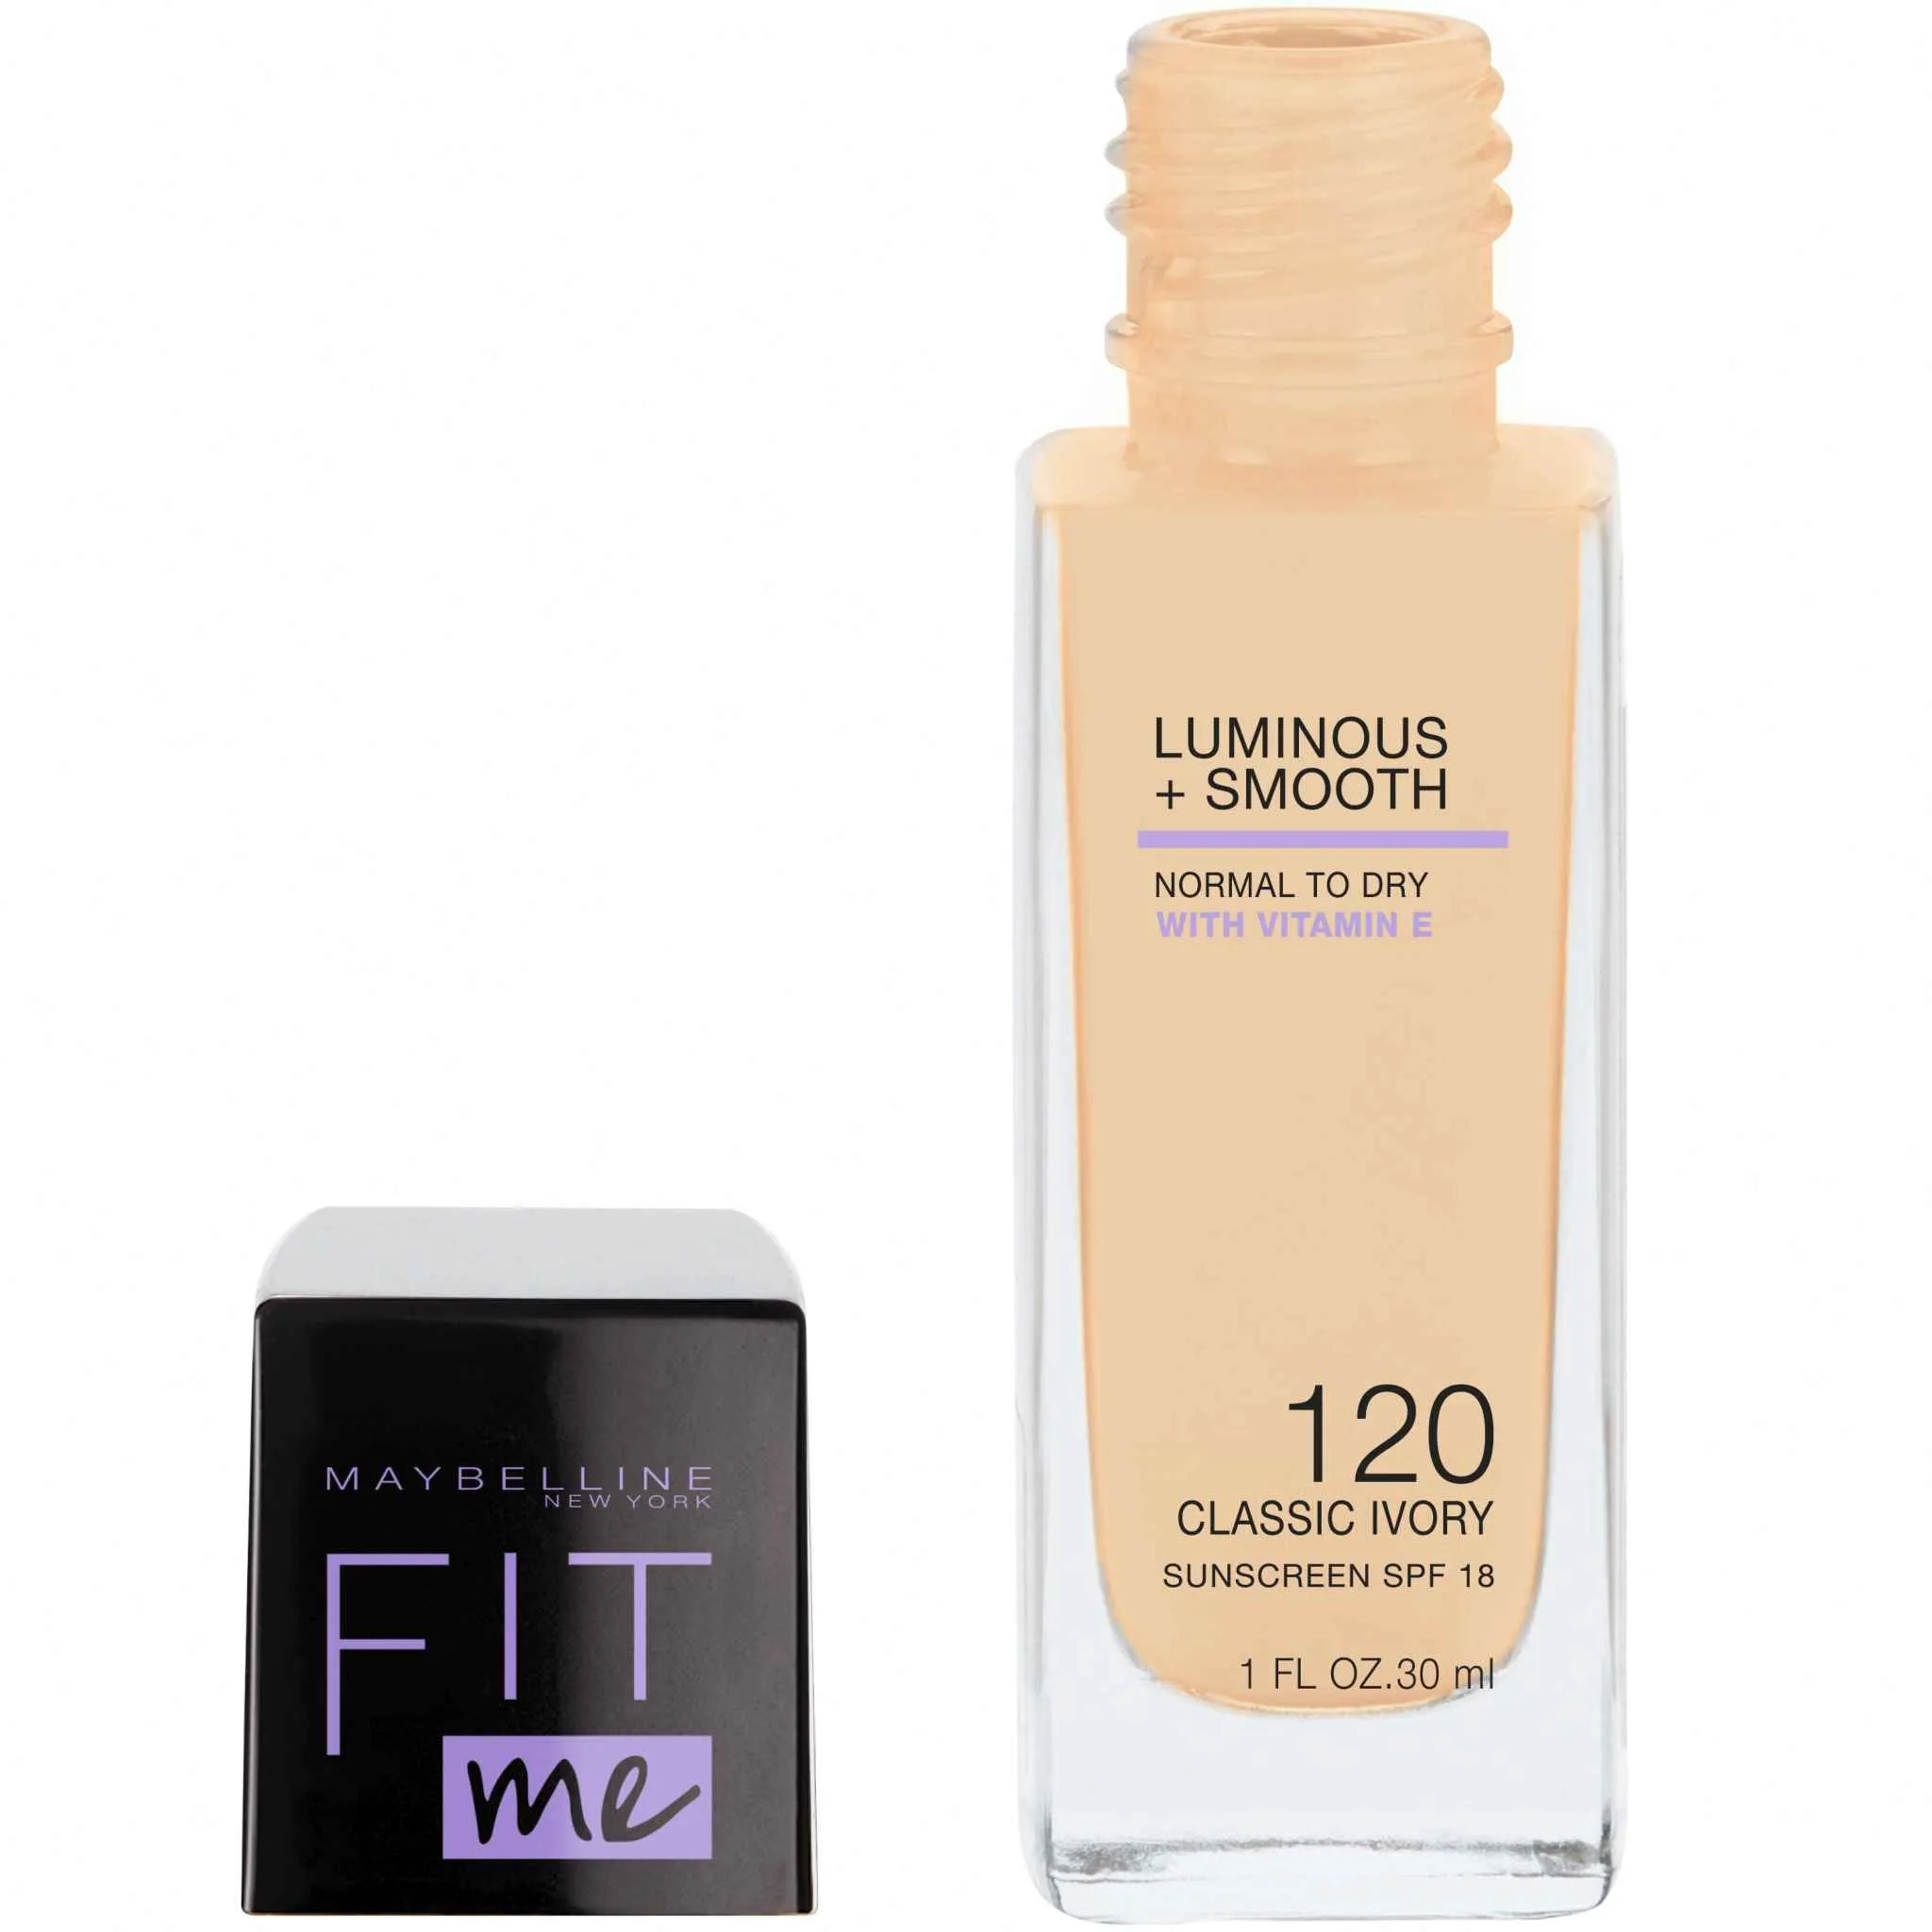 Maybelline New York Fit me Luminous + Smooth 120 Classic Ivory make-up 1×30 ml, make-up